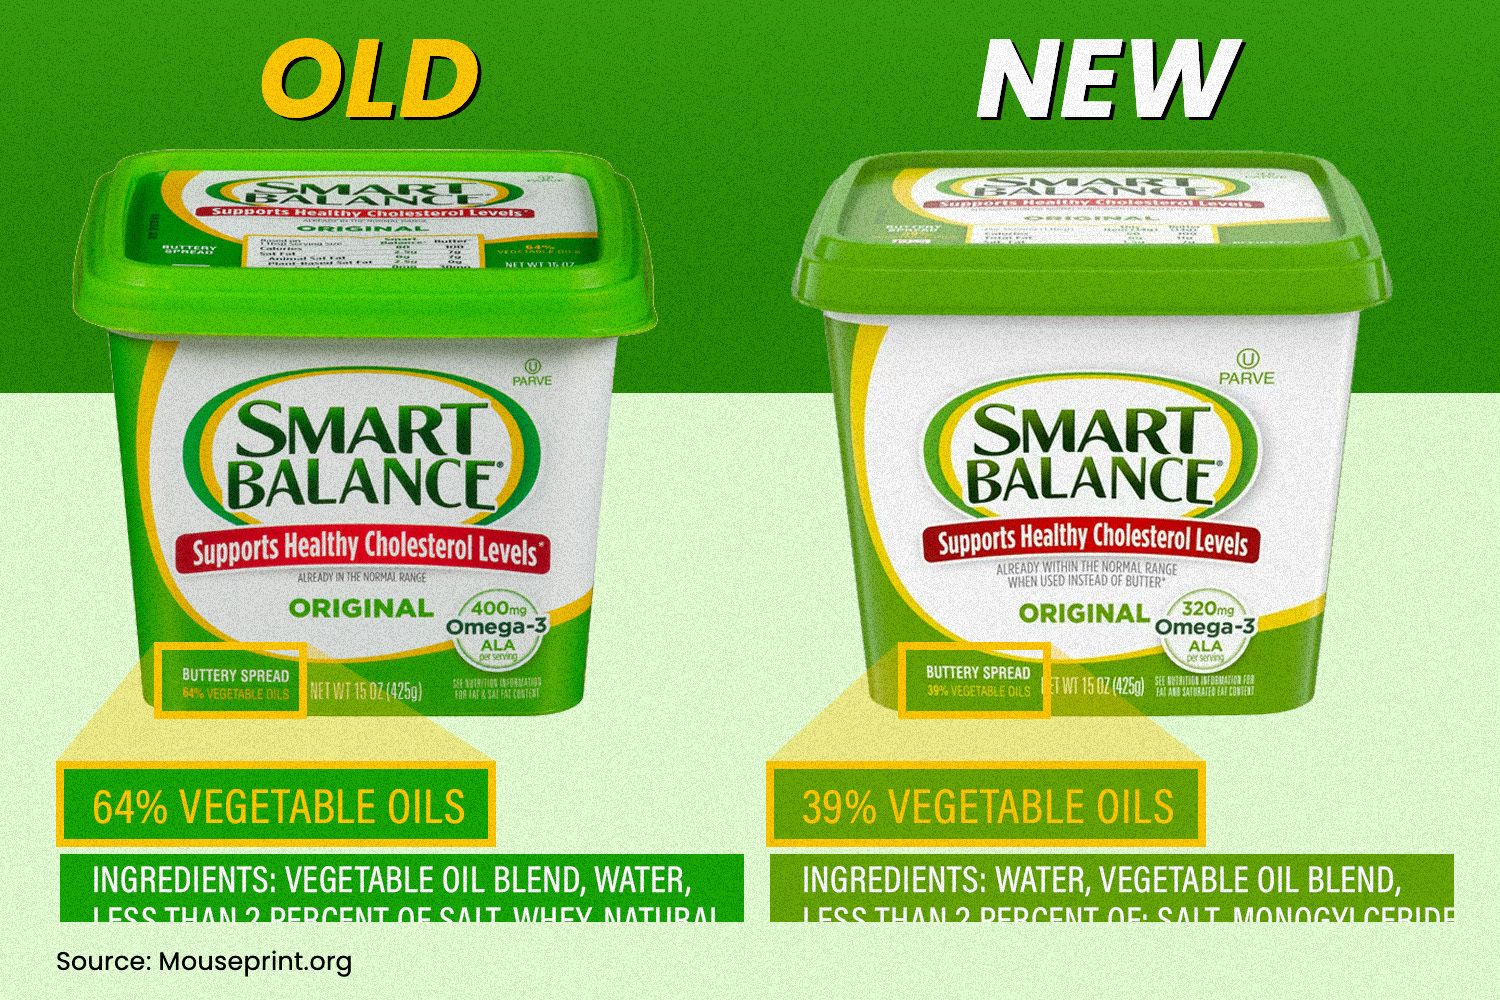 Smart Balance's buttery spread is facing a backlash over 'skimpflation